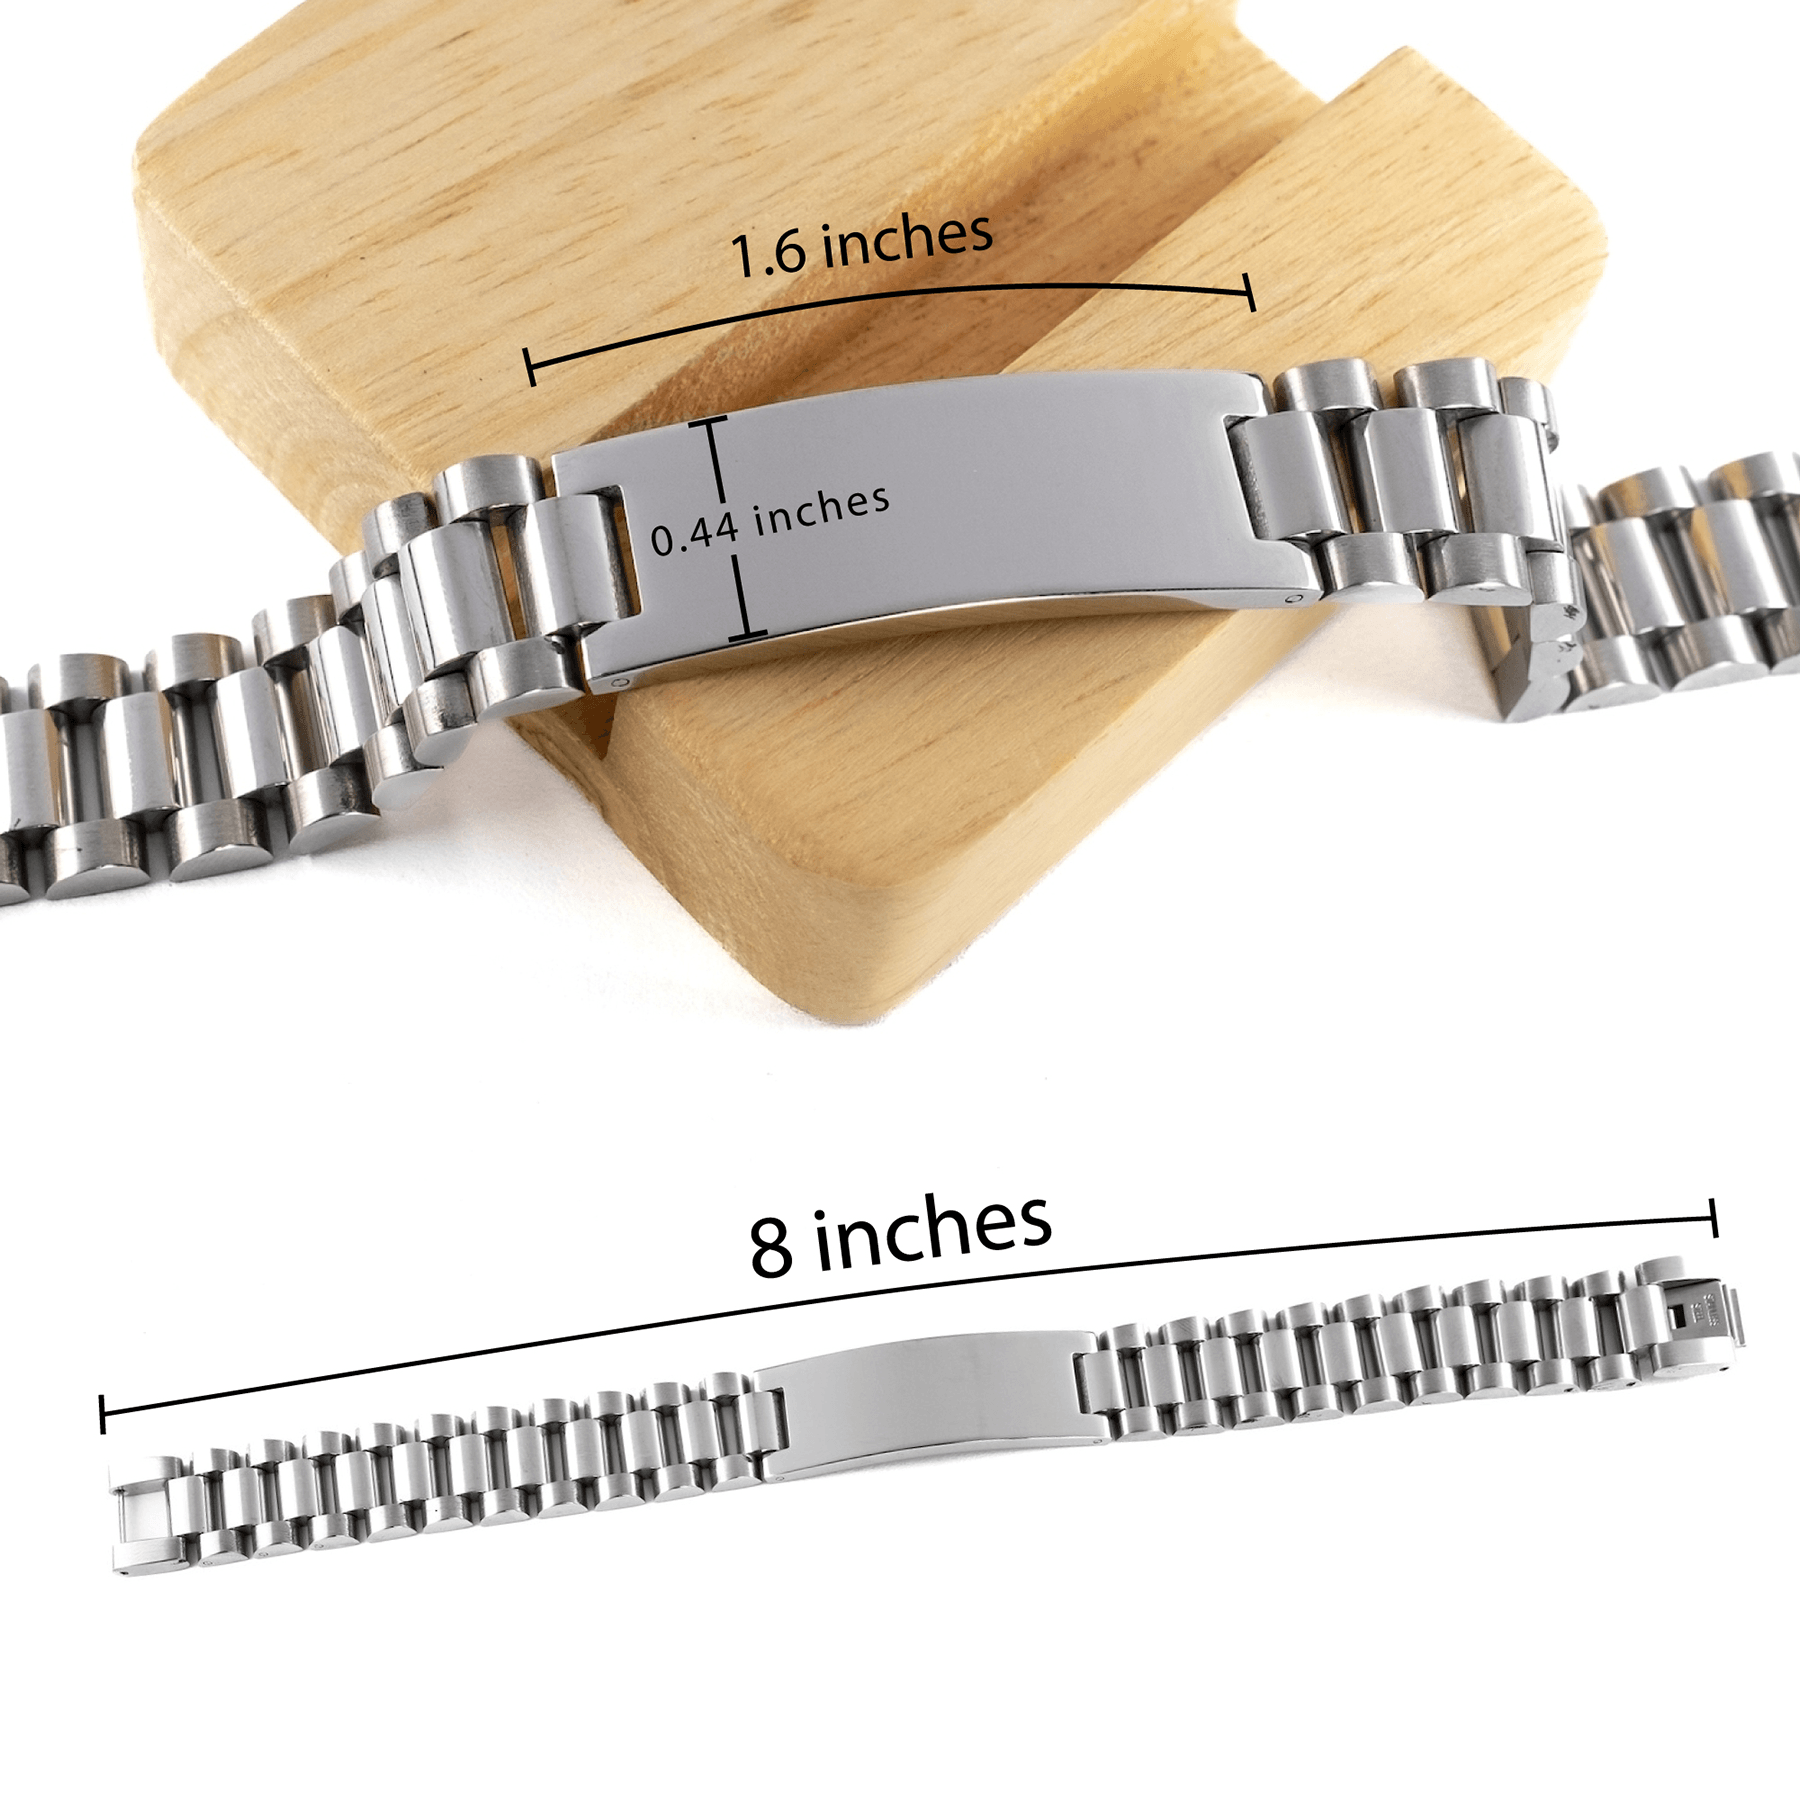 Remarkable Logger Gifts, Your dedication and hard work, Inspirational Birthday Christmas Unique Ladder Stainless Steel Bracelet For Logger, Coworkers, Men, Women, Friends - Mallard Moon Gift Shop